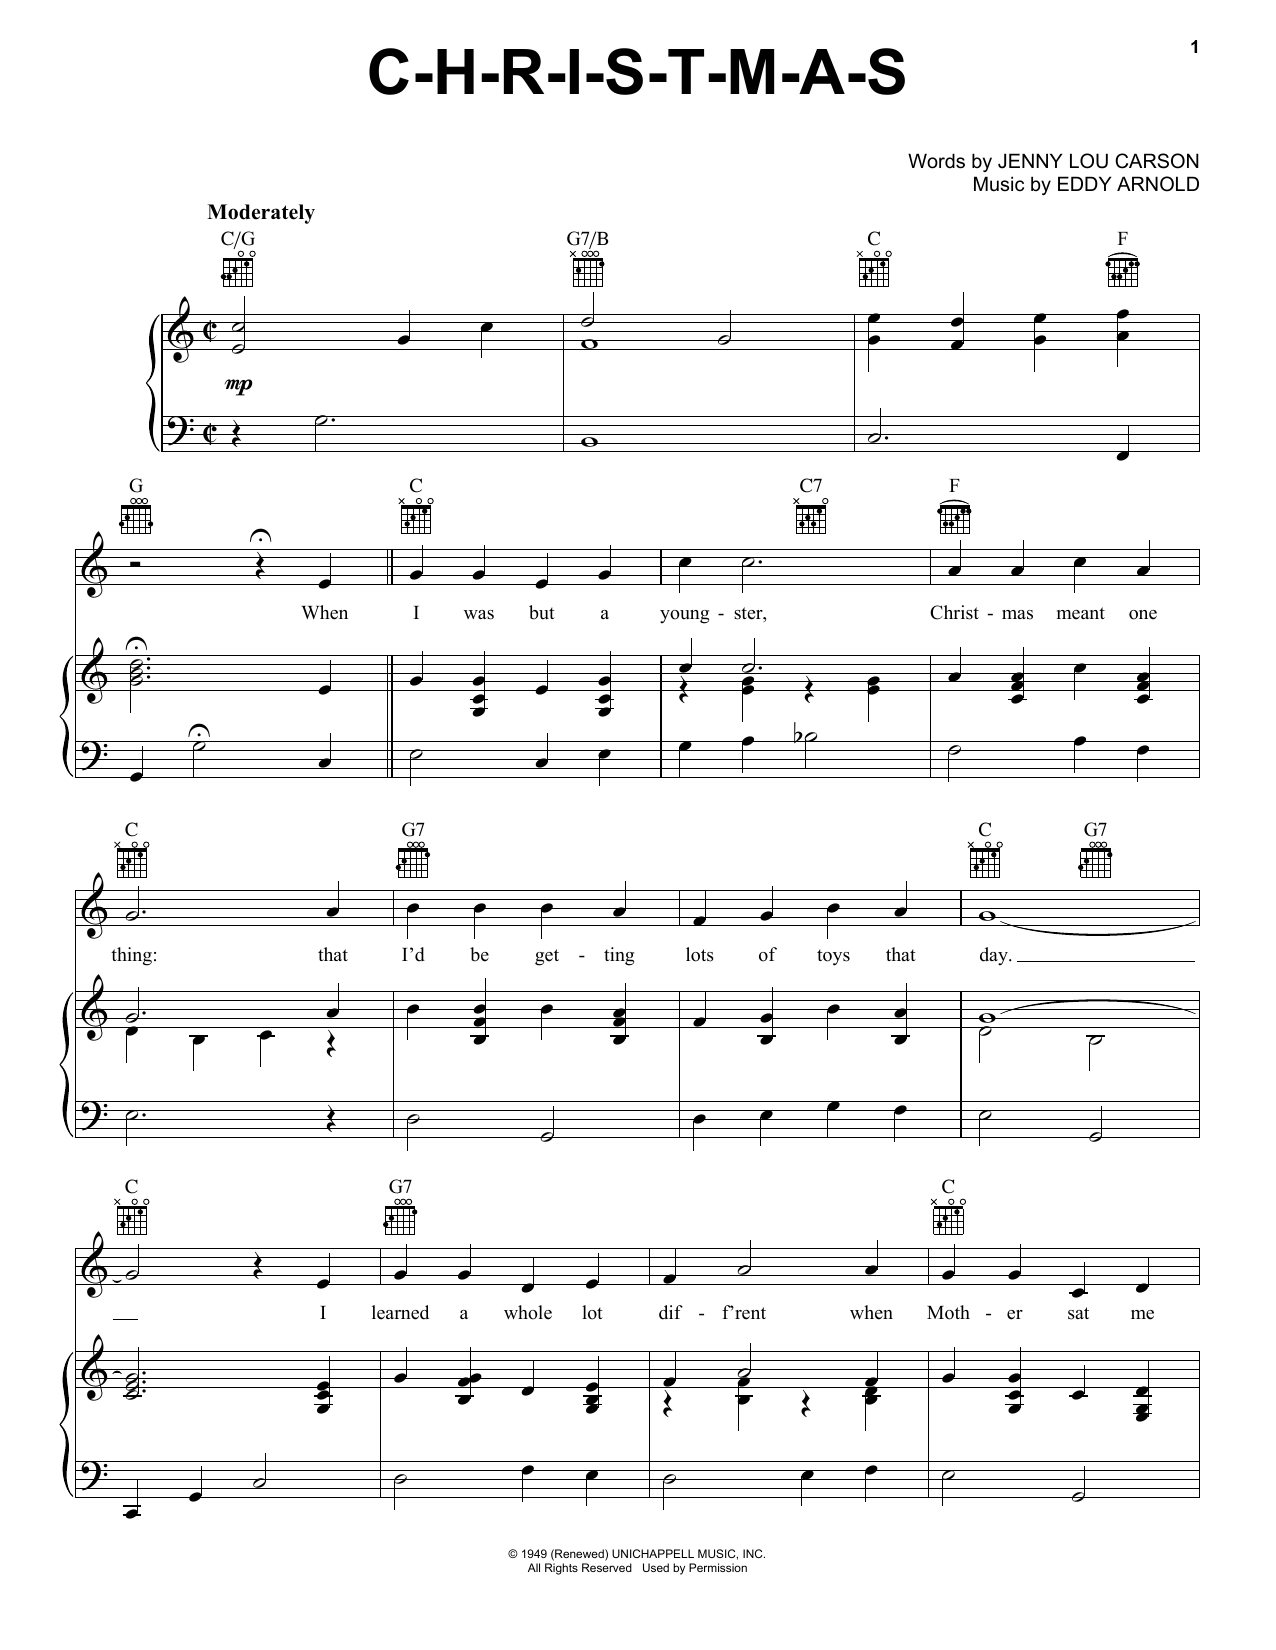 Eddy Arnold C-H-R-I-S-T-M-A-S sheet music notes and chords. Download Printable PDF.